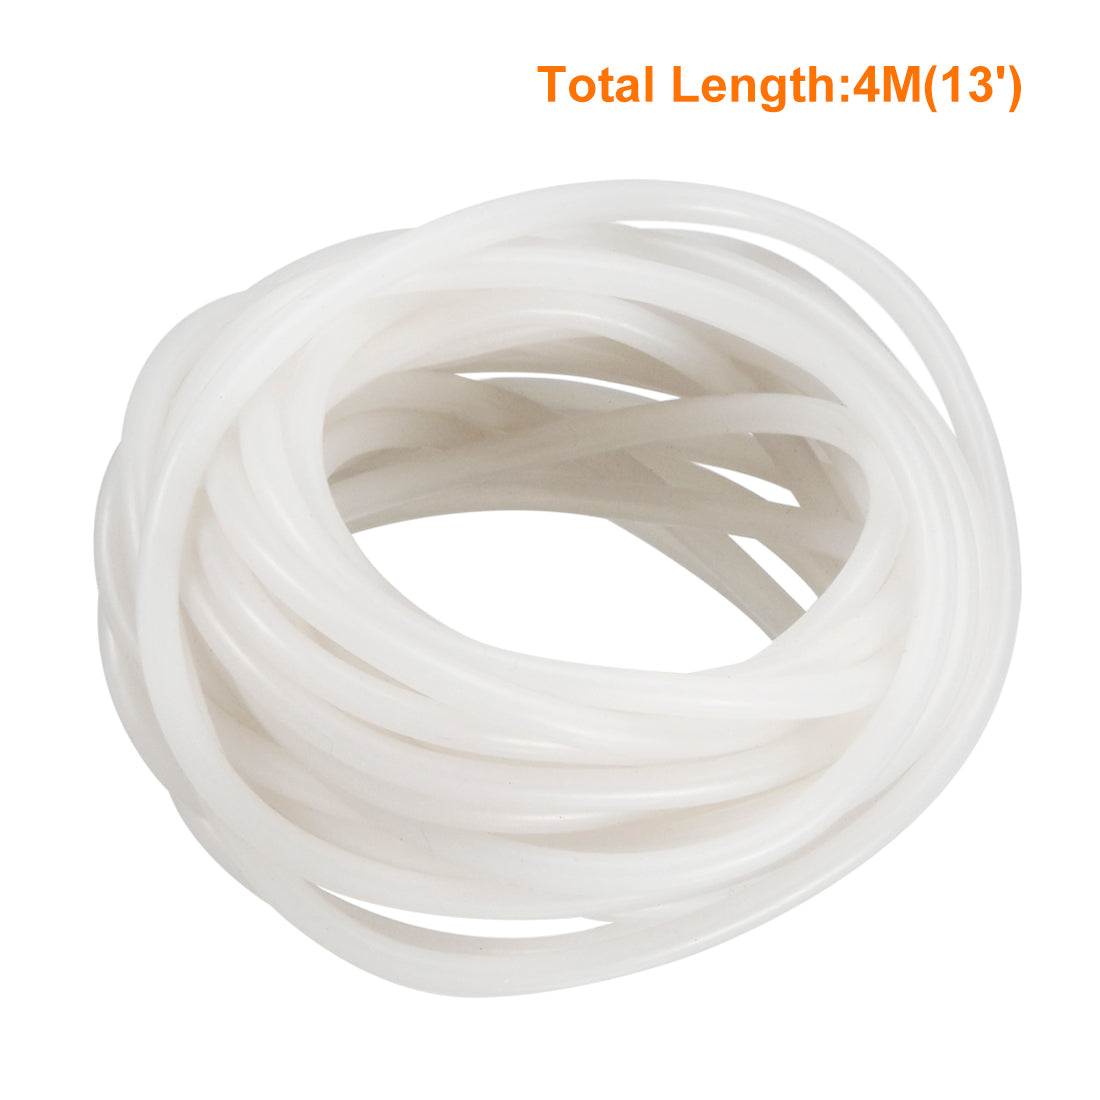 uxcell Uxcell Silicone Tube 10mm ID X 13mm OD 13' Flexible Silicone Rubber Tubing Water Air Hose Pipe Translucent for Pump Transfer